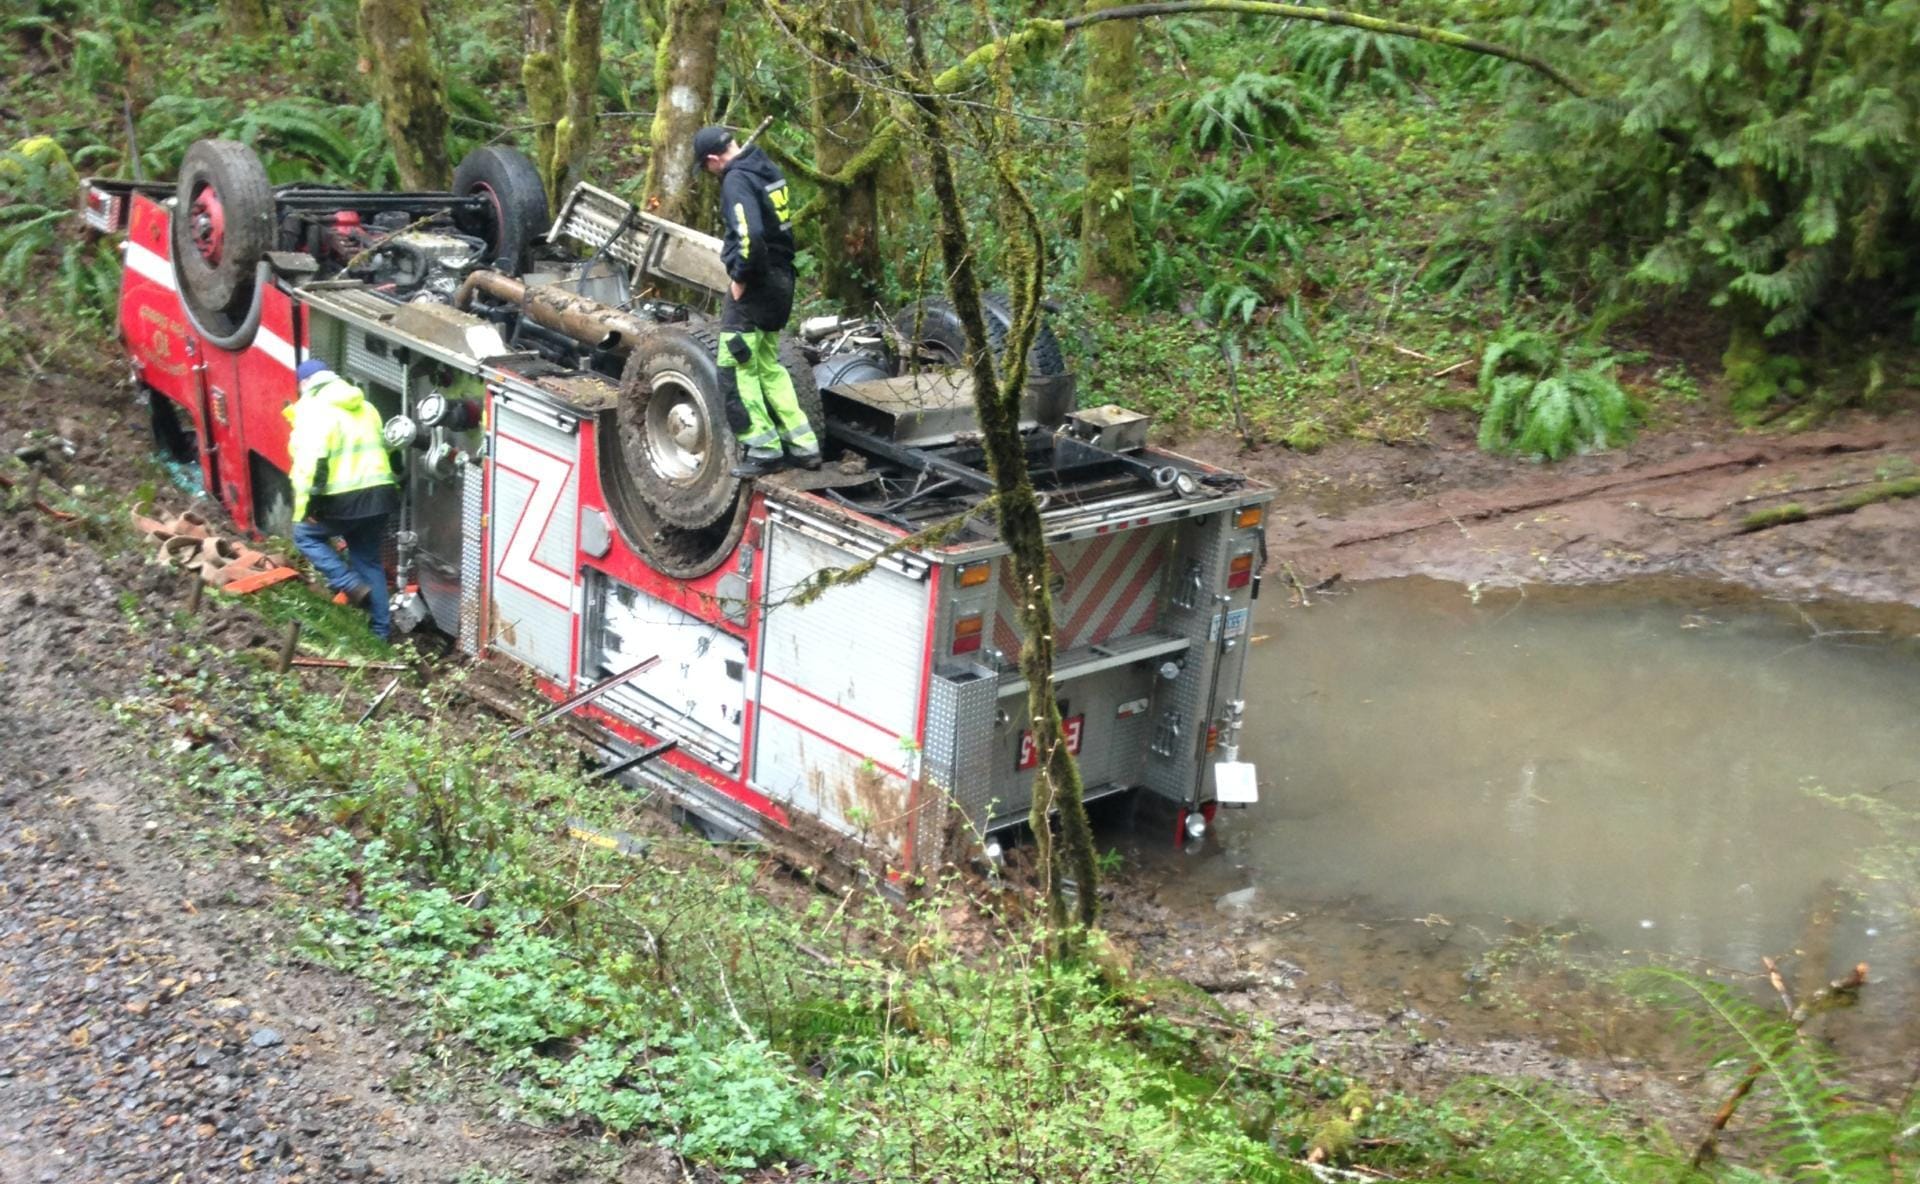 A Clark County Fire District 10 engine rolled over off a narrow unpaved road northeast of La Center on Monday. Crews were responding to a sick call.